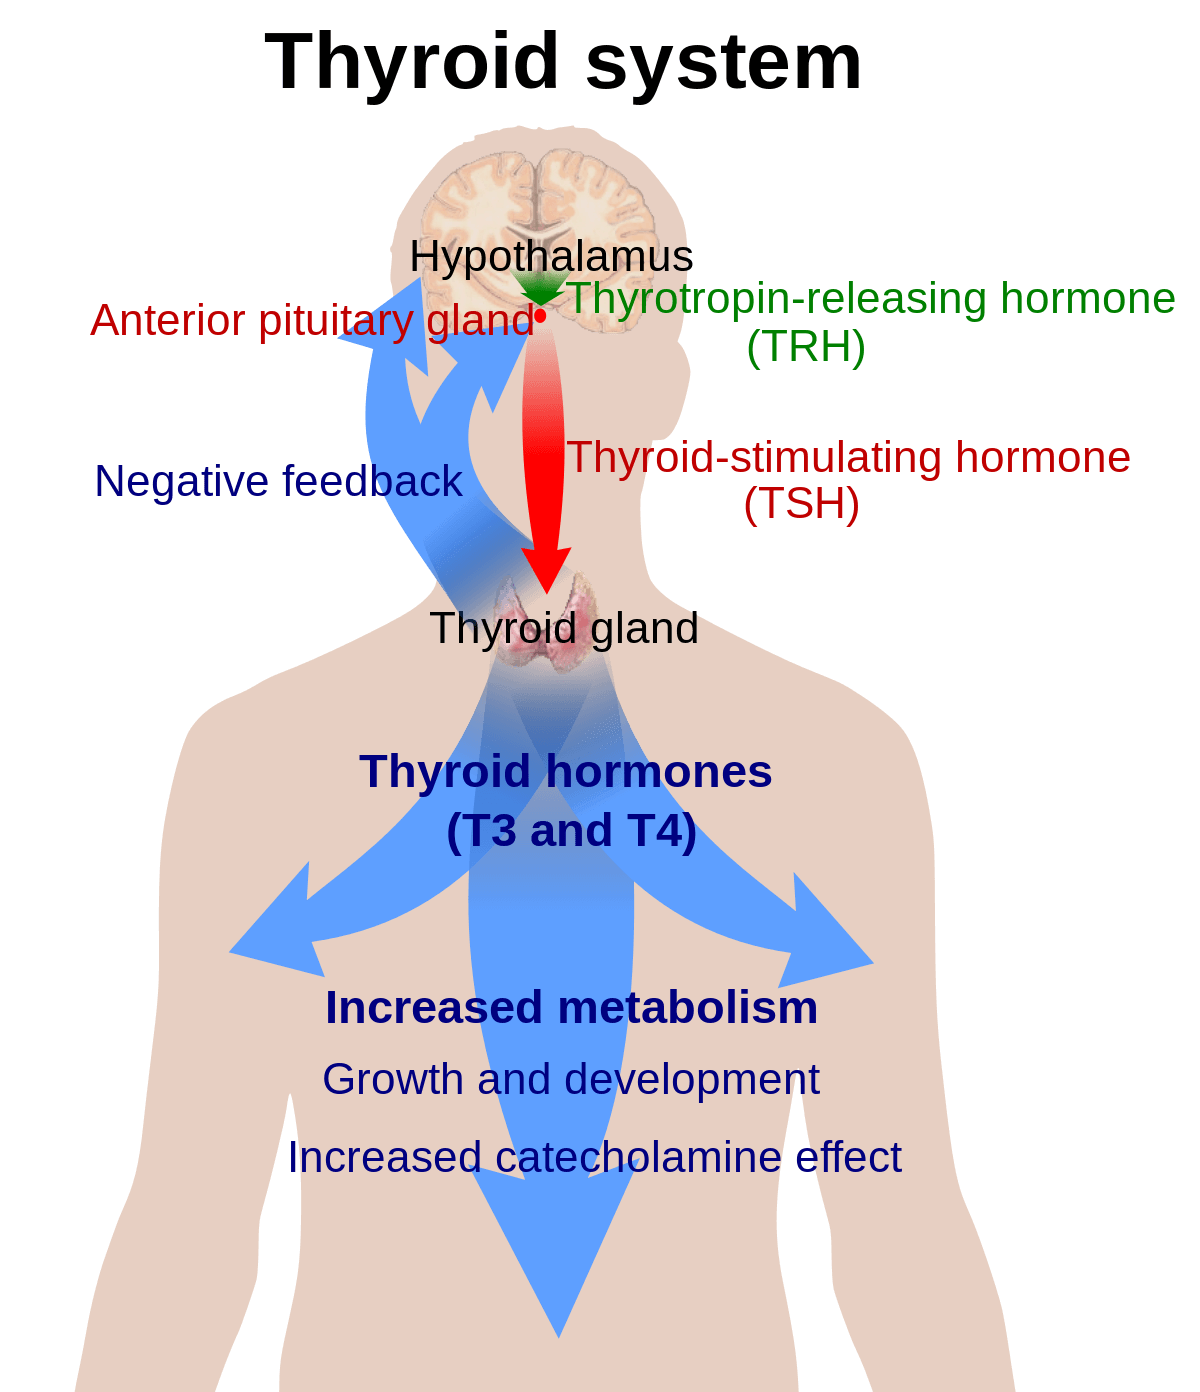 Front view of the body showing the effects and mechanisms of the thyroid system and metabolism related to obesity